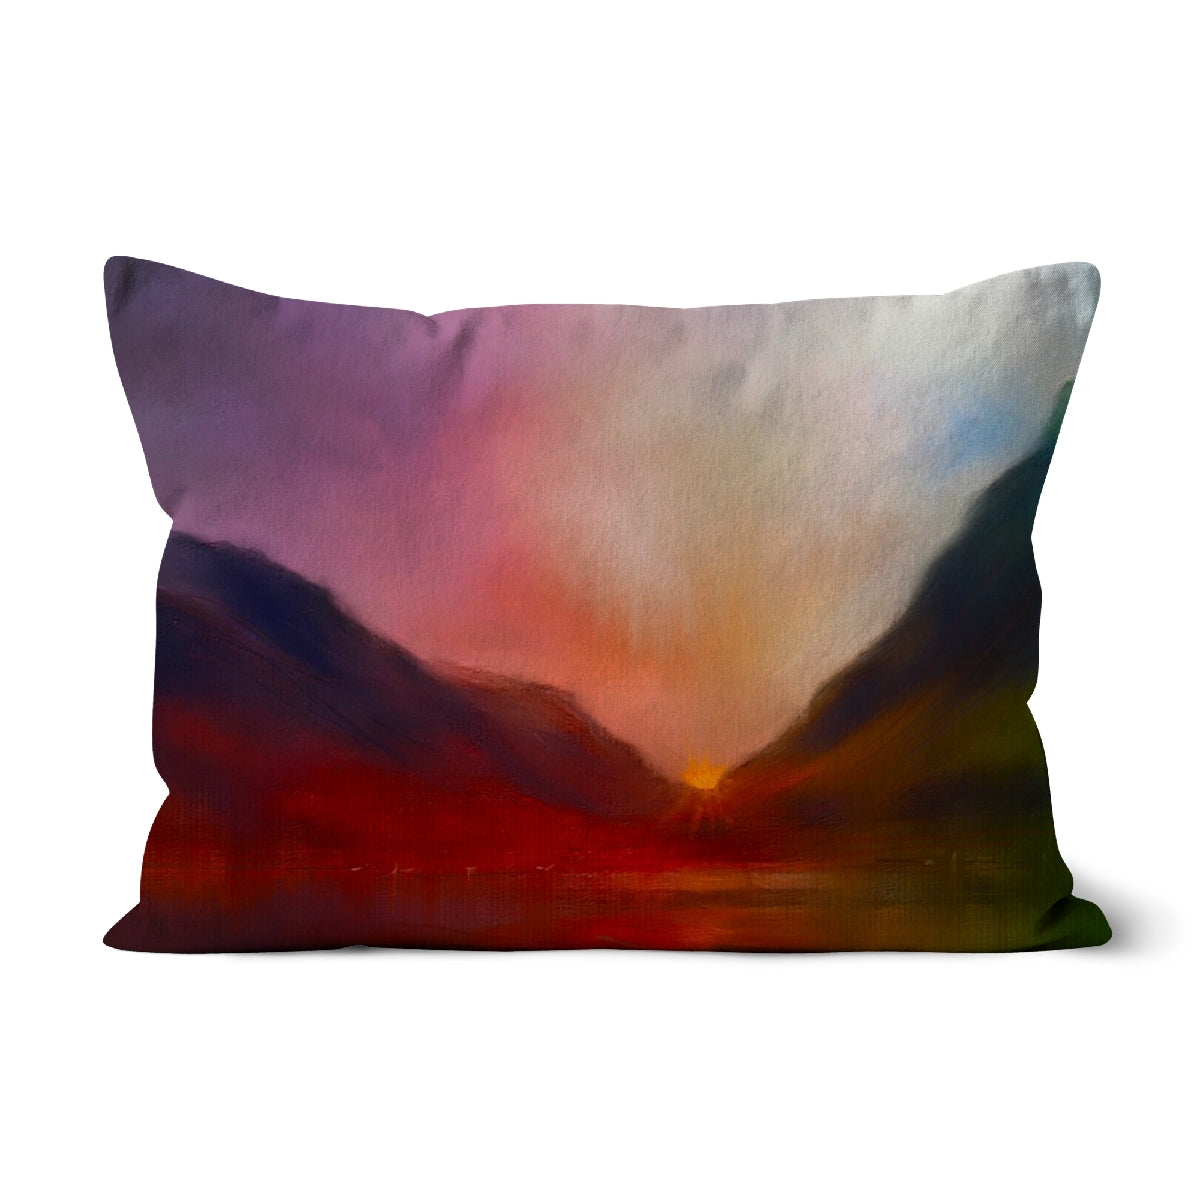 Glencoe Sunset Art Gifts Cushion-Cushions-Glencoe Art Gallery-Faux Suede-19"x13"-Paintings, Prints, Homeware, Art Gifts From Scotland By Scottish Artist Kevin Hunter